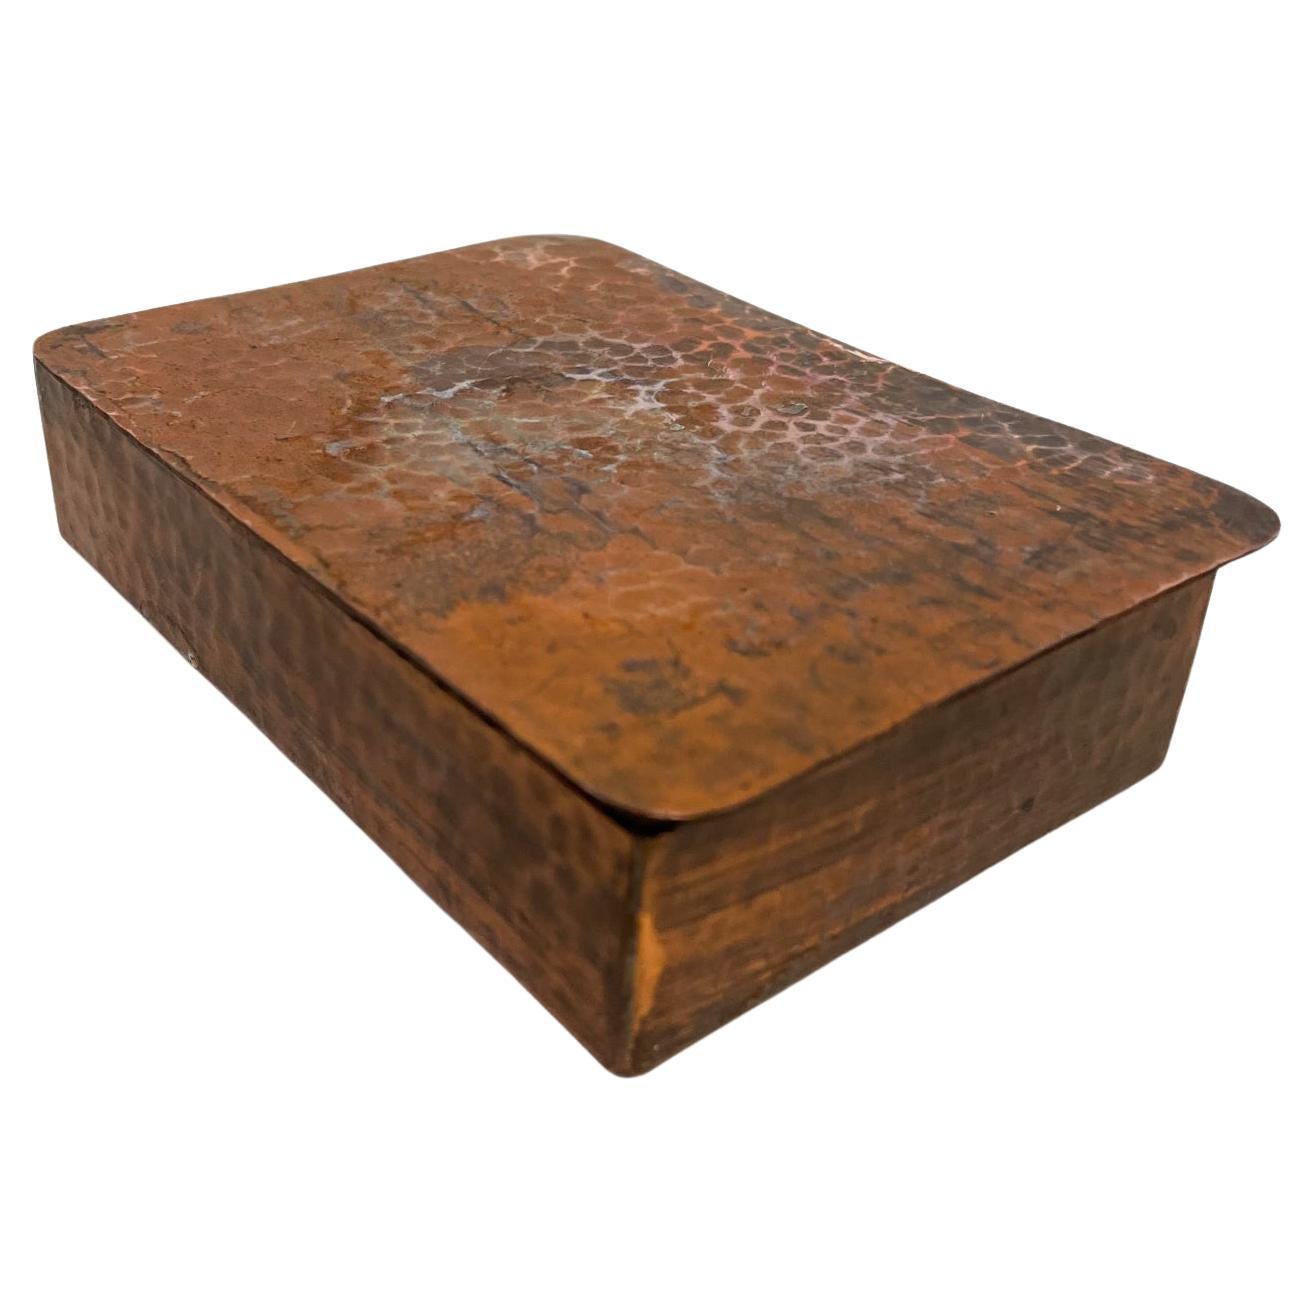 Copper box.
Arts & Crafts petite hand hammered copper box trinket storage.
In the style of Roycroft. No label.
Measures: 5.13 wide x 3.63 deep x 1.25 tall.
Preowned original unrestored vintage condition. Patina wear present.
See images